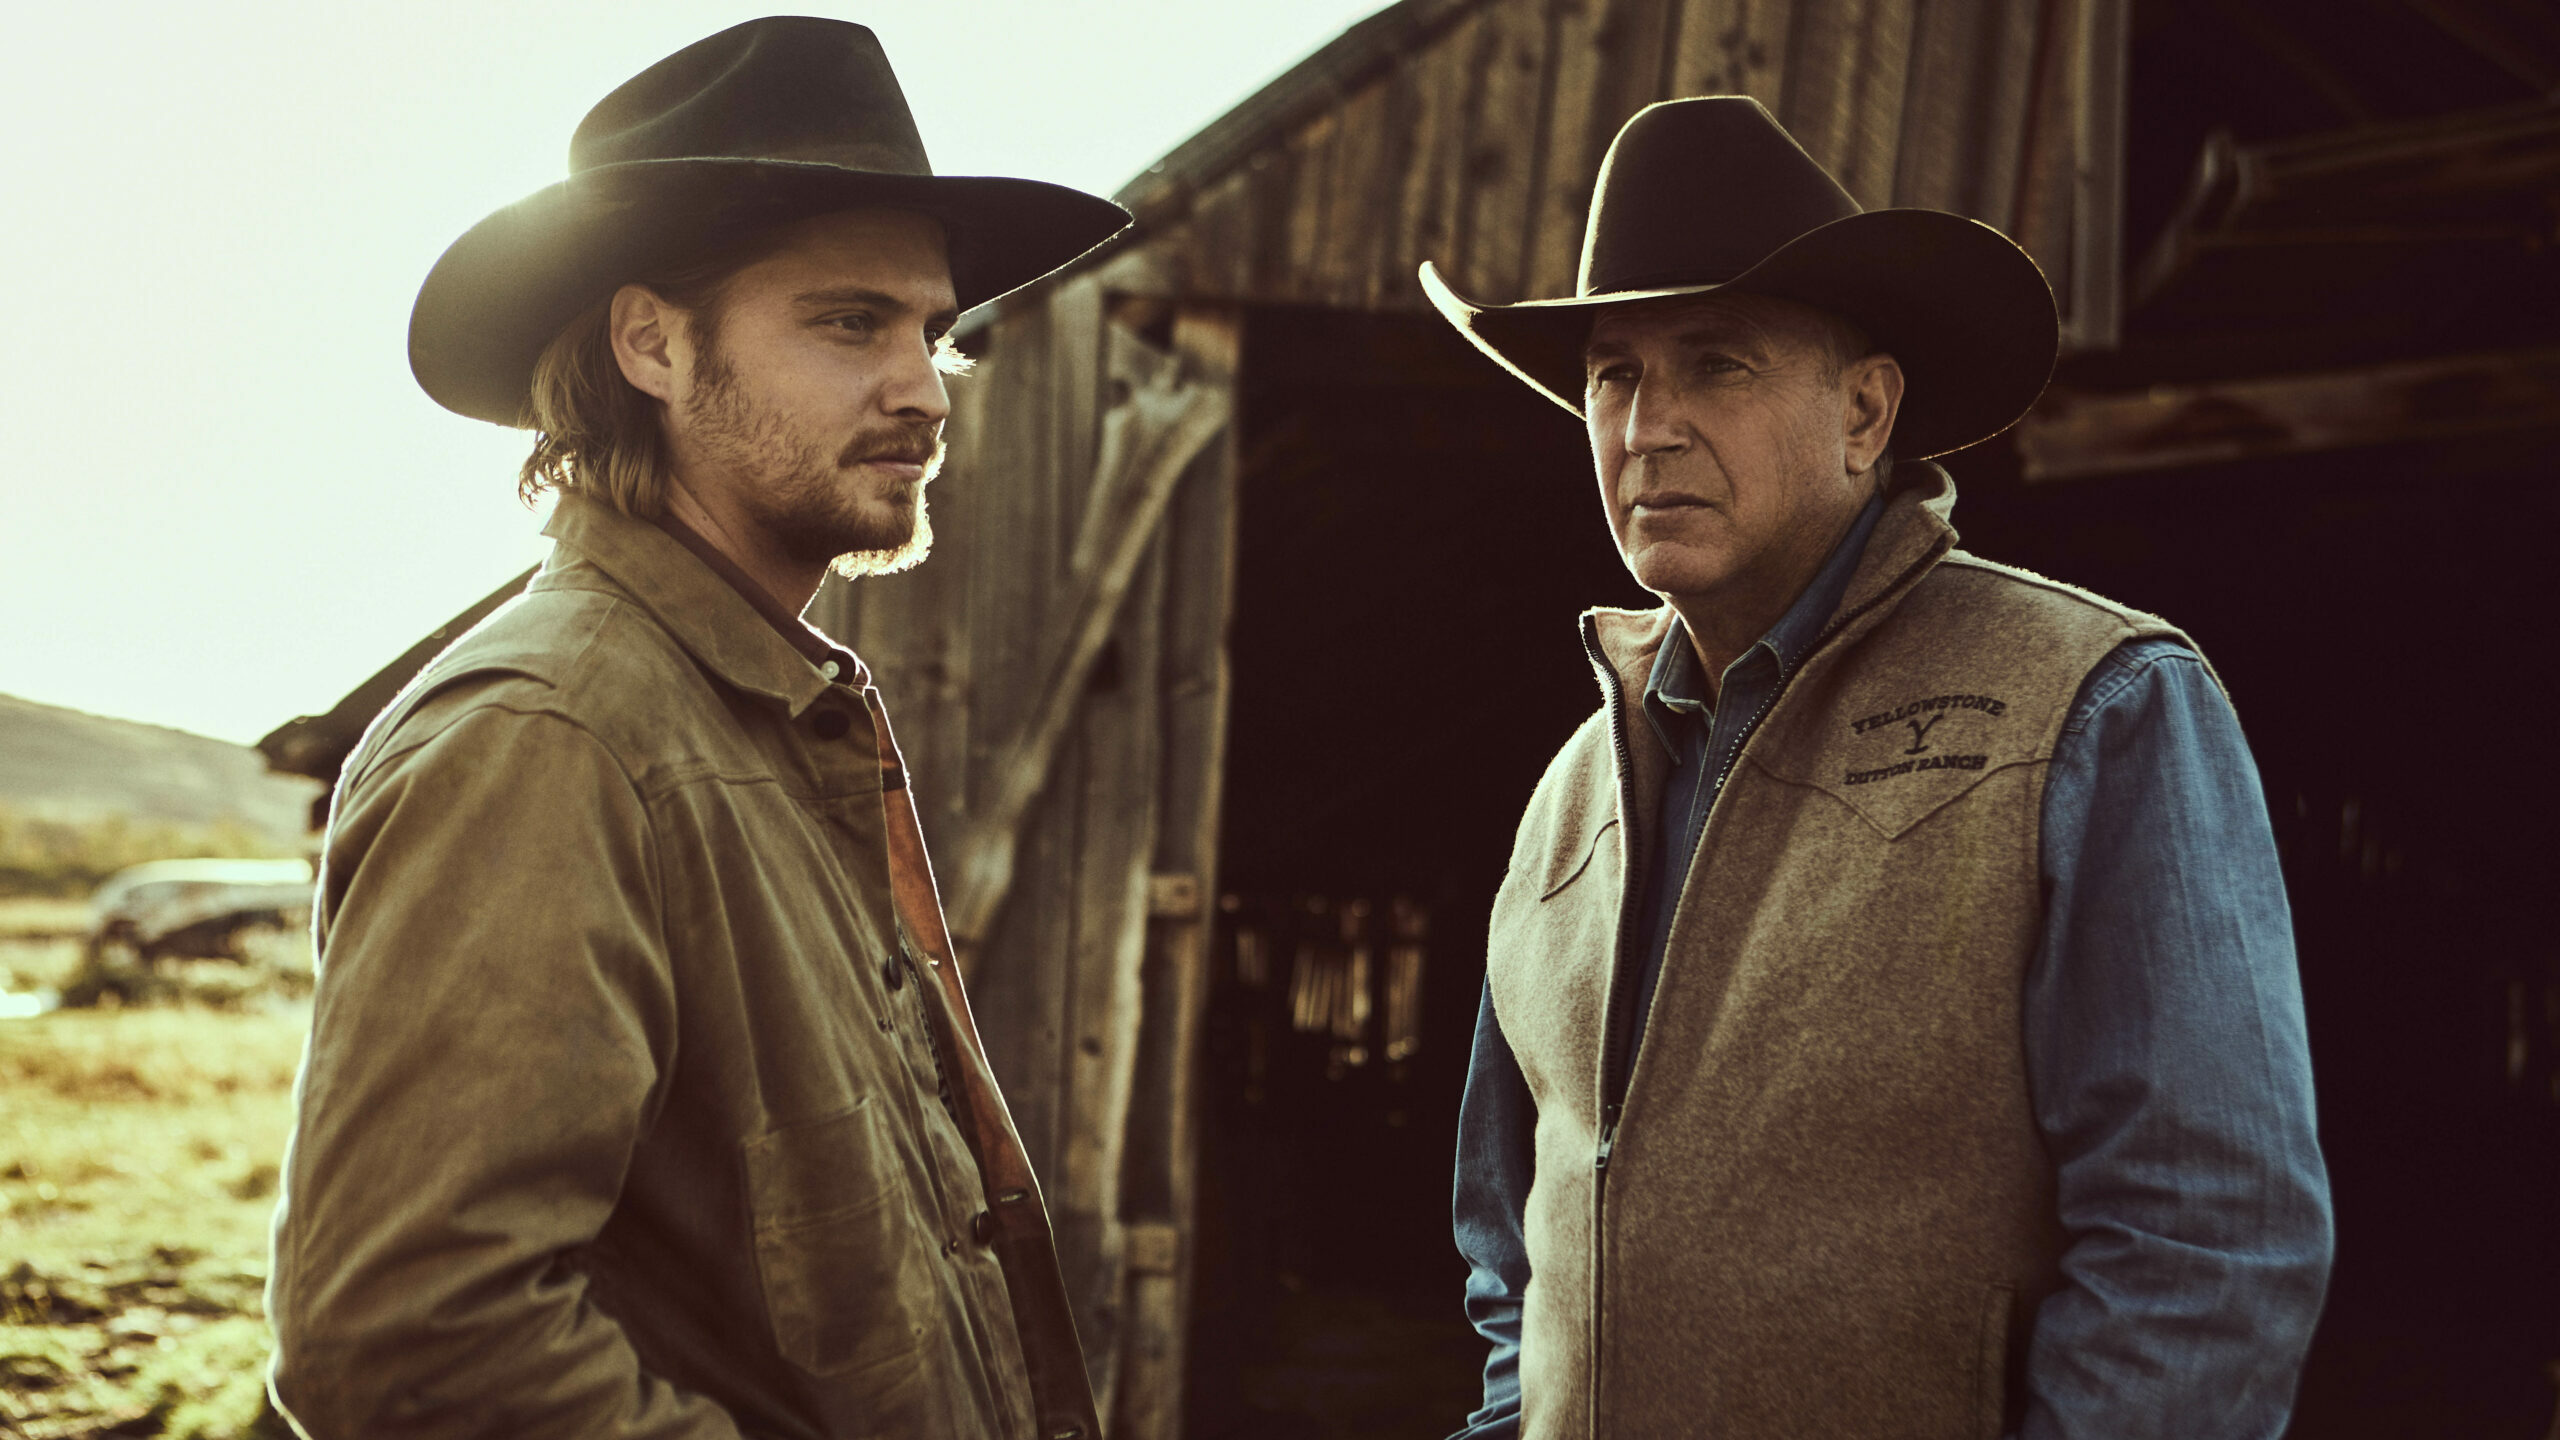 Latest ‘Yellowstone’ News: Luke Grimes hints at heartache for a Dutton couple as Wes Bentley opens up about his struggle with addiction